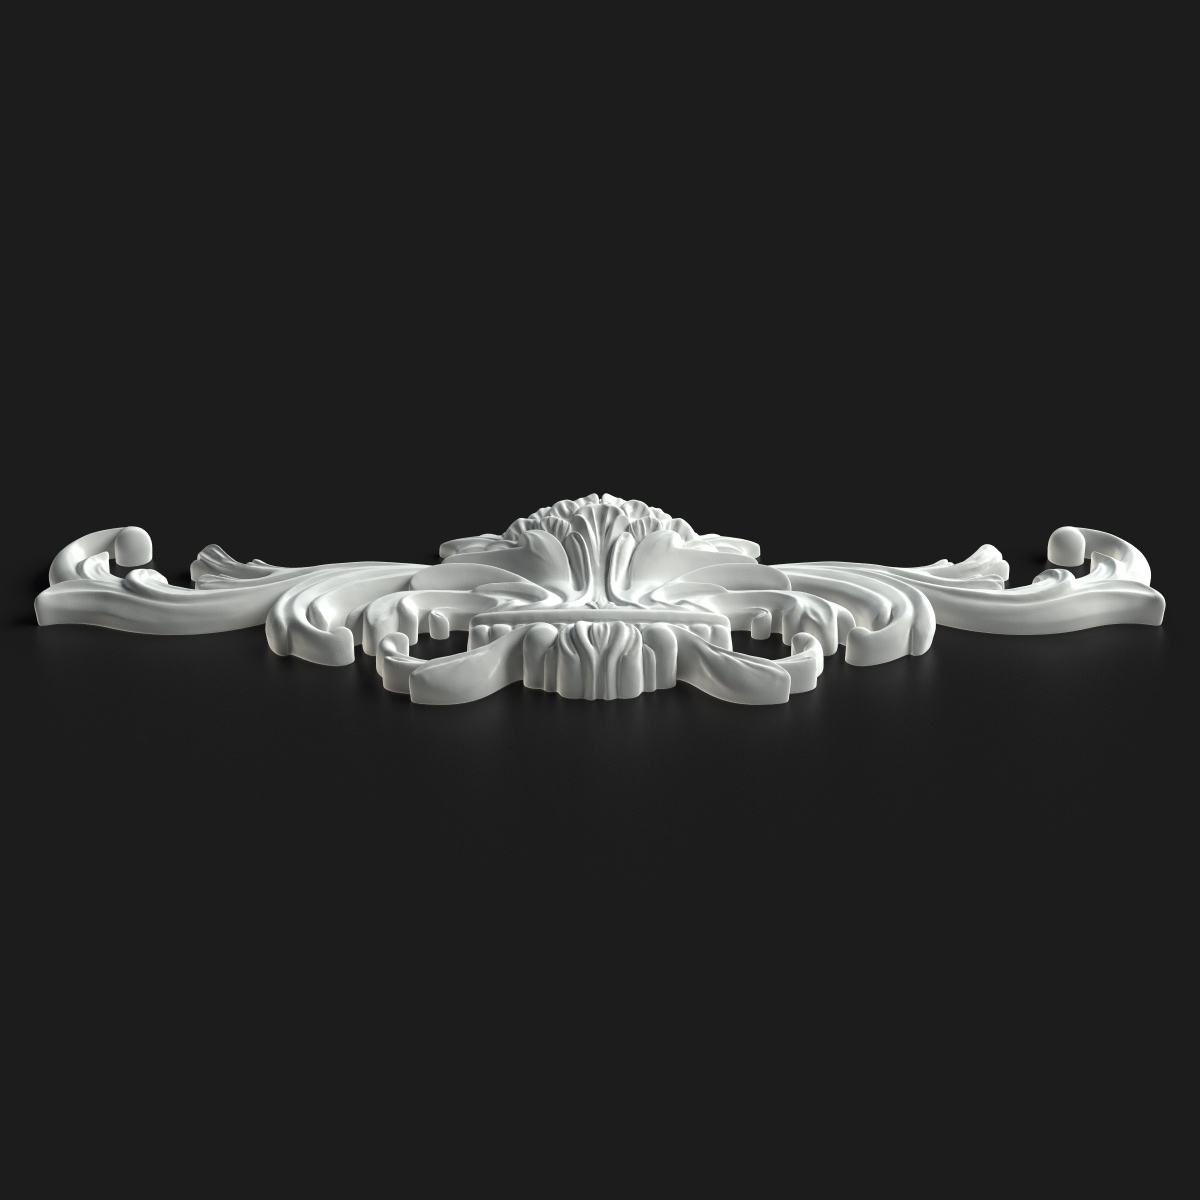 Digital Sculpting of Complex Furniture Elements. Creation 3D Models for Prototyping and Production.